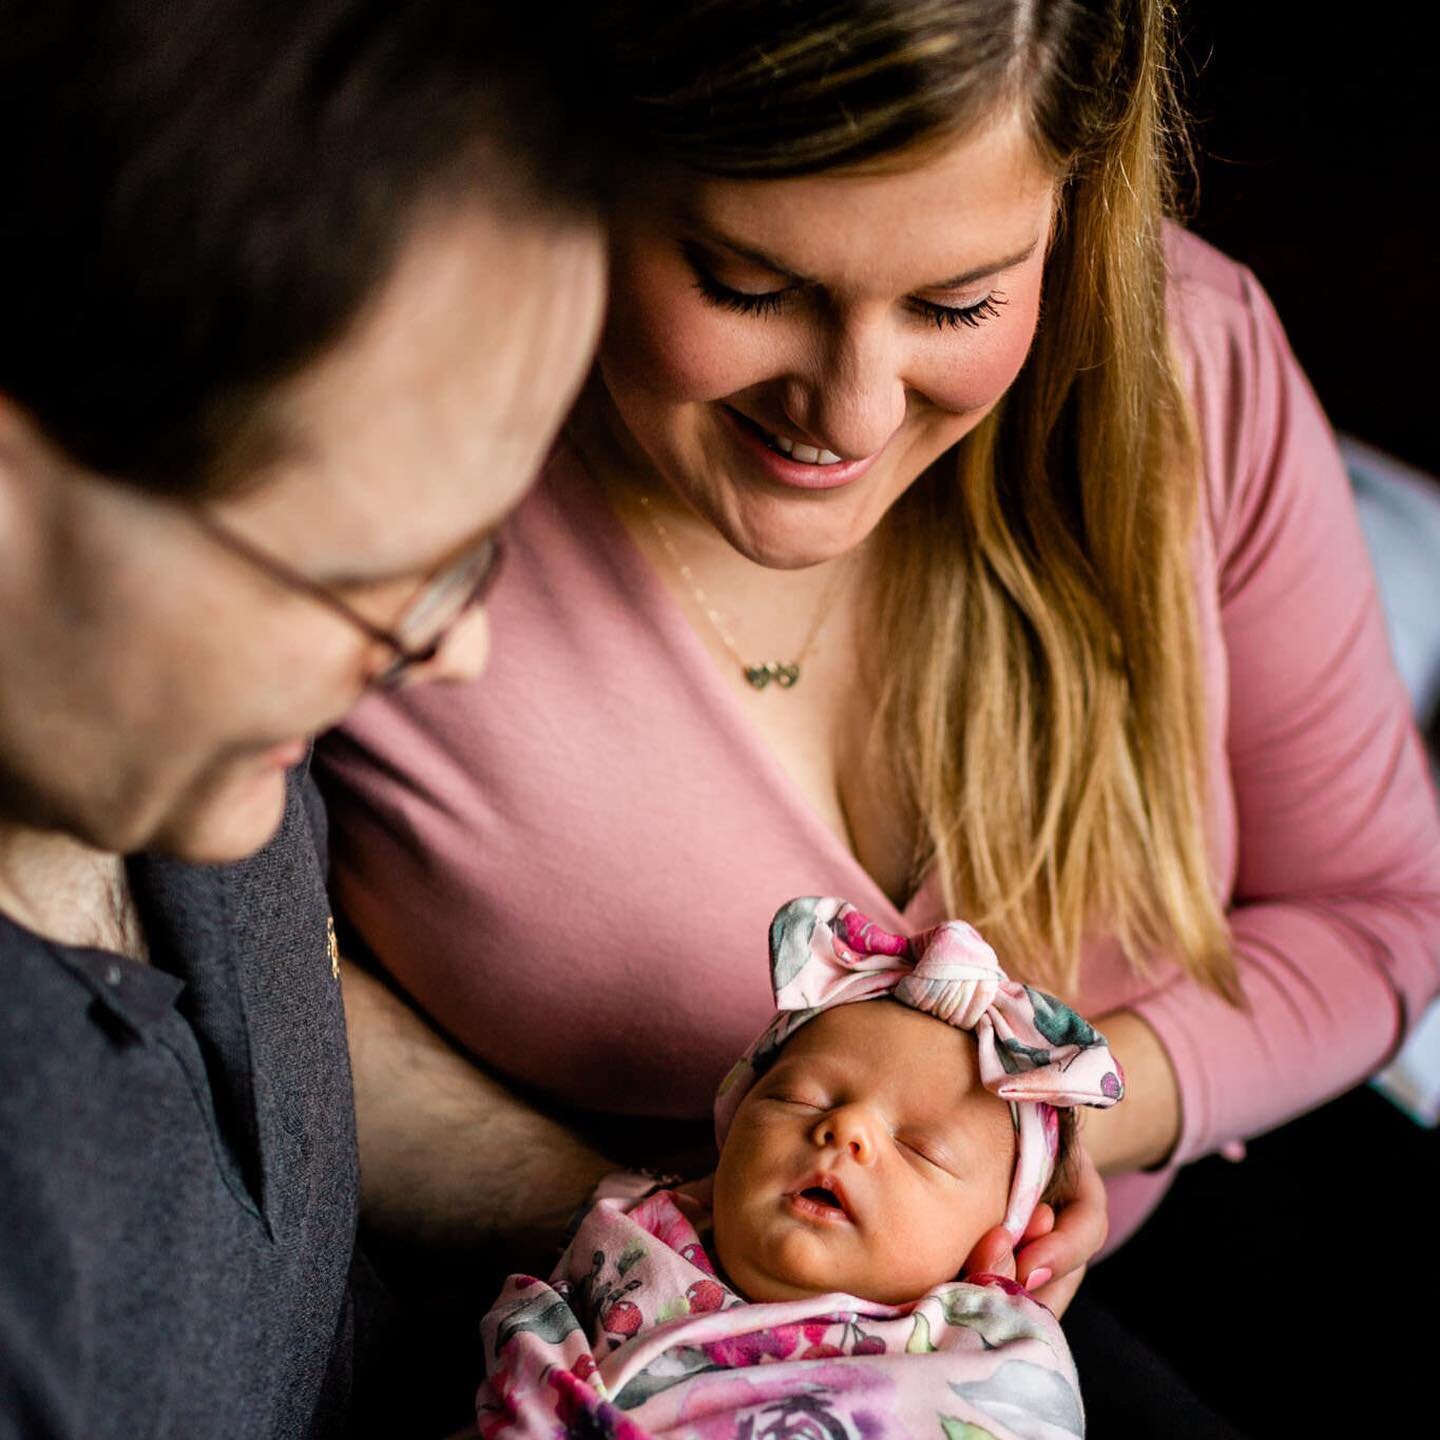 What a JOY it was to capture newborn photos for my friends, Juliet and Chris! They welcomed a BEAUTIFUL baby girl in January, and she was truly a sweet and happy baby. Even at the beginning of the shoot, she gave the cutest little expressions and gri